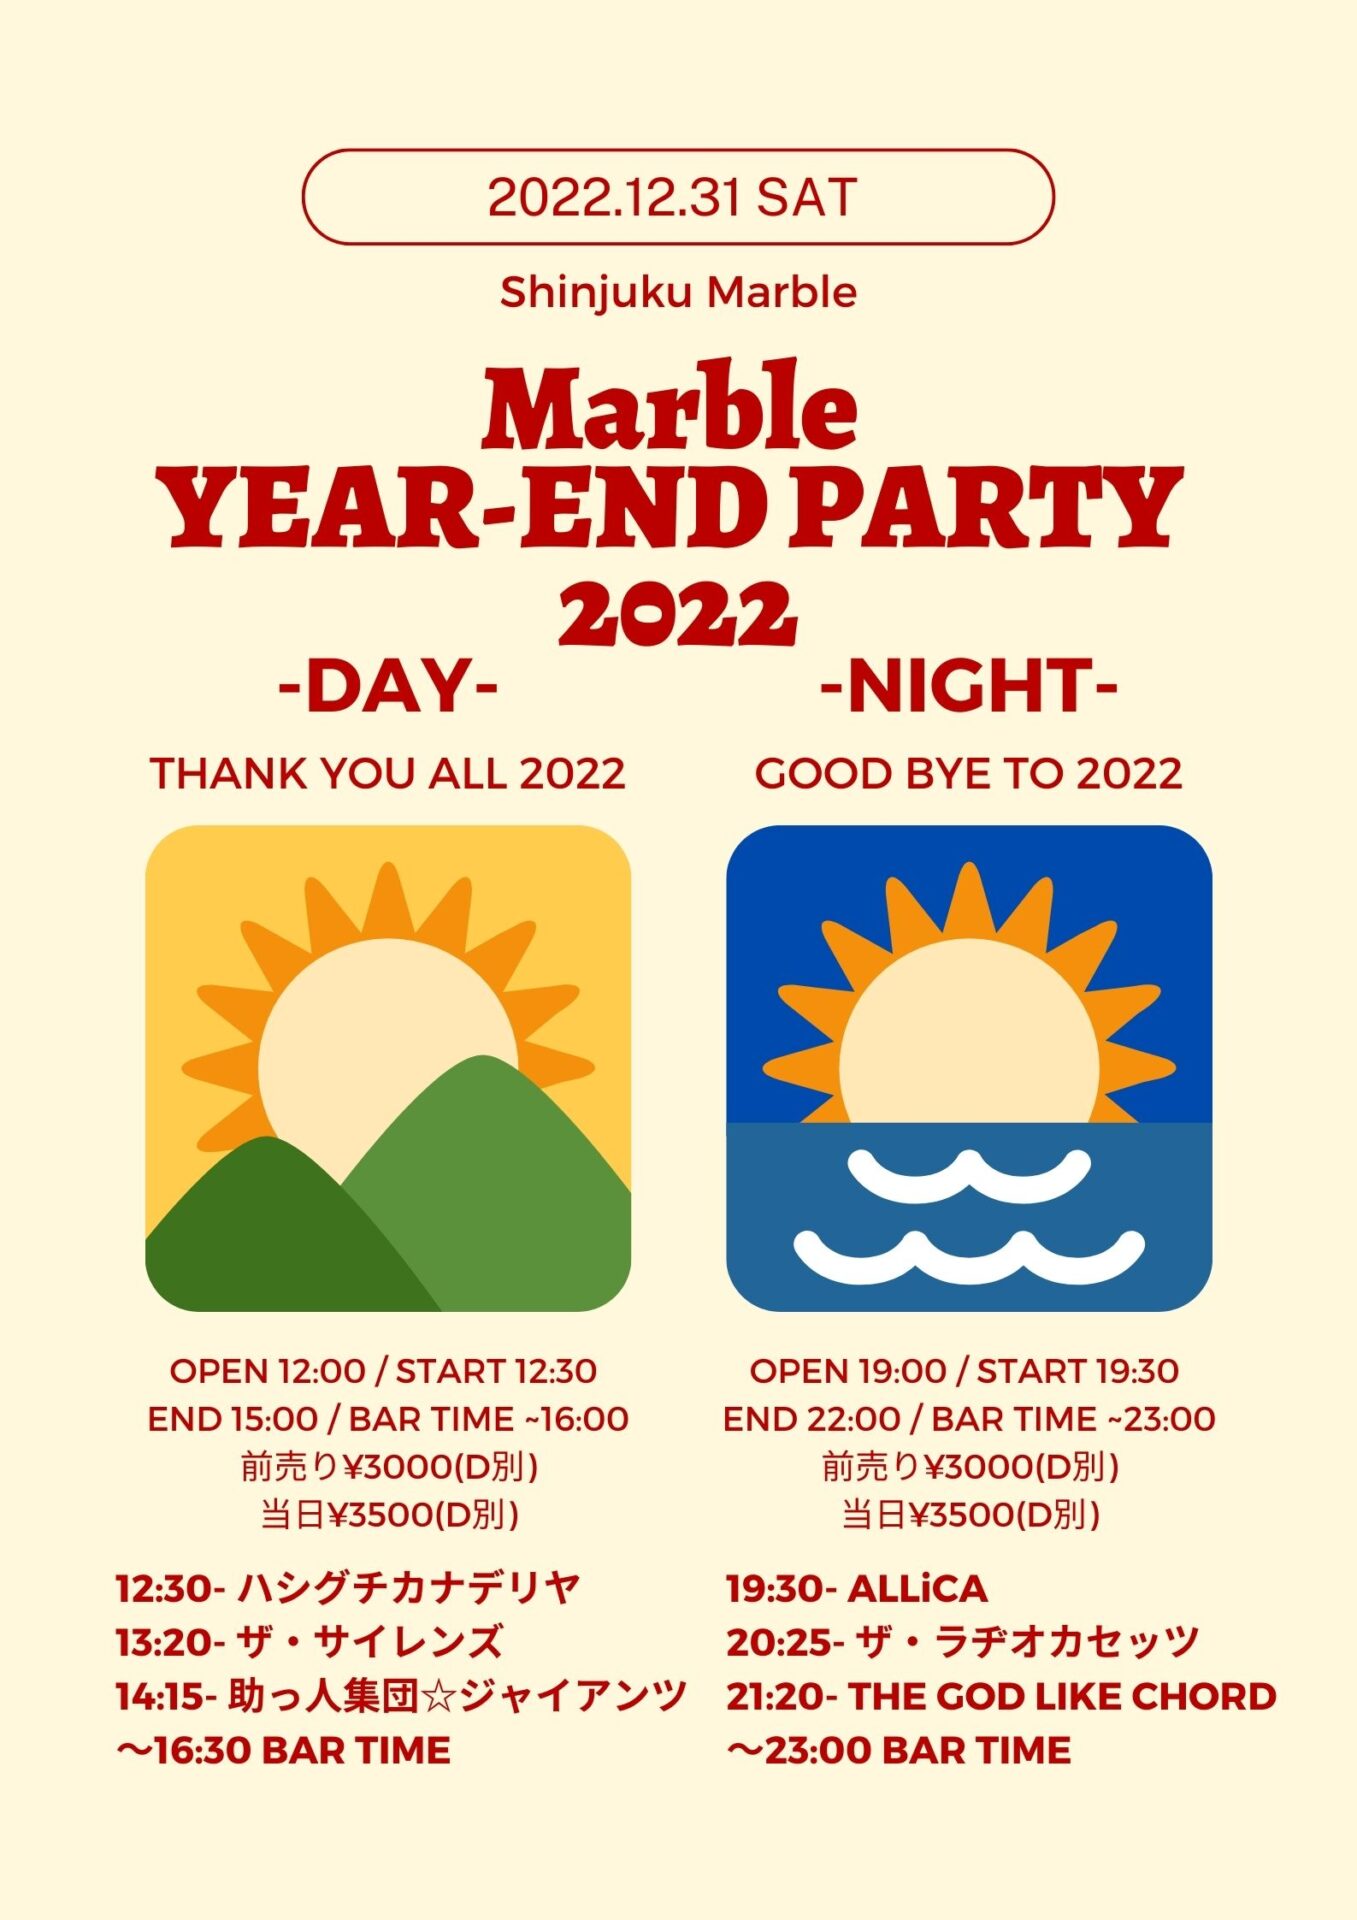 Marble YEAR-END PARTY 2022 -NIGHT-「GOOD BYE TO 2022」